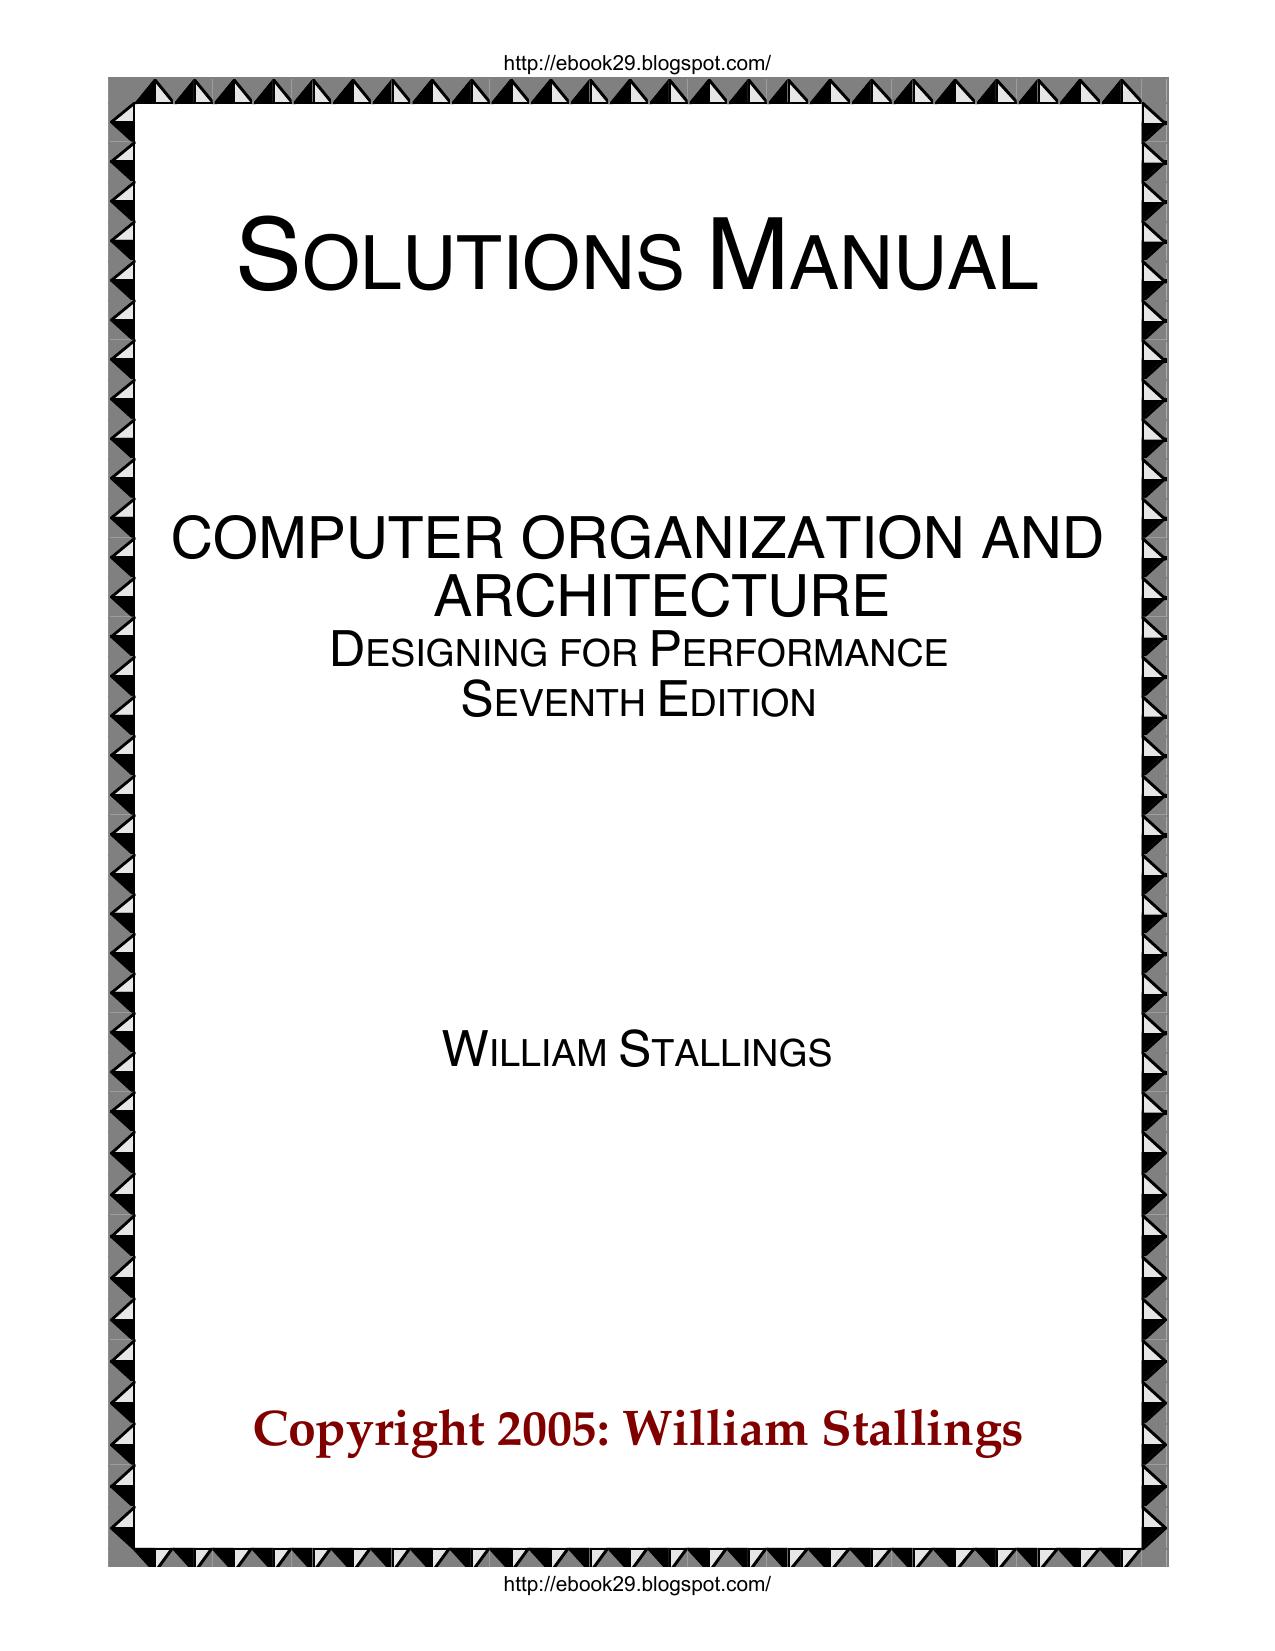 computer organization and architecture - designing for performance